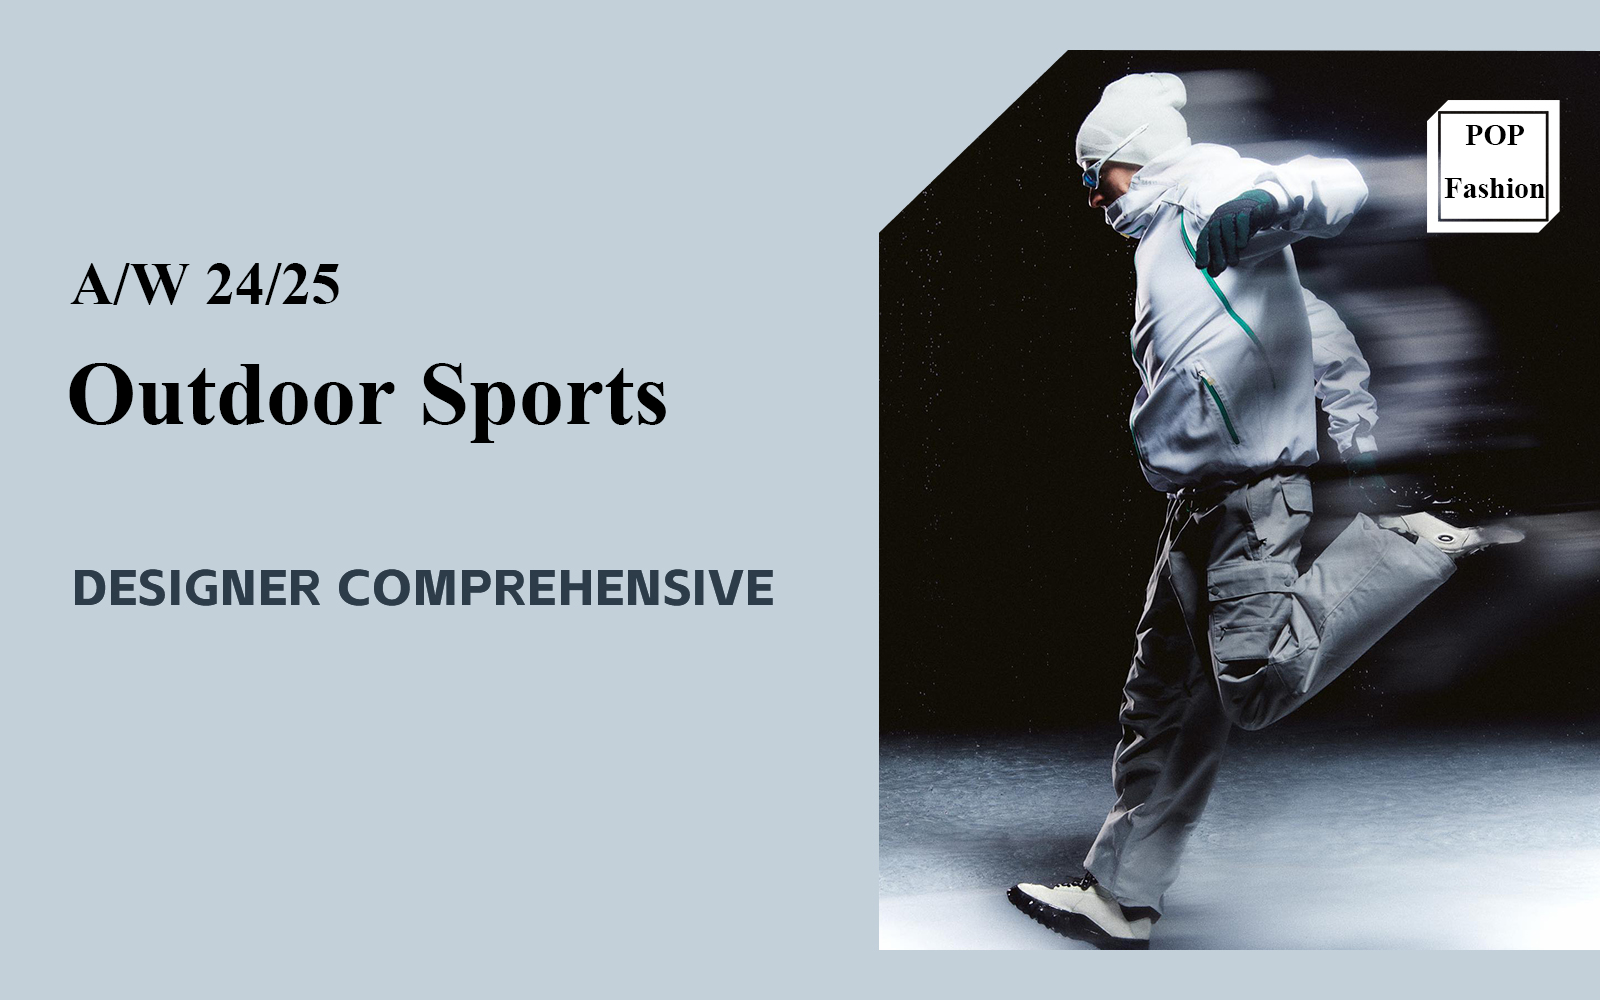 Outdoor Sports -- The Comprehensive Analysis of Designer Brand